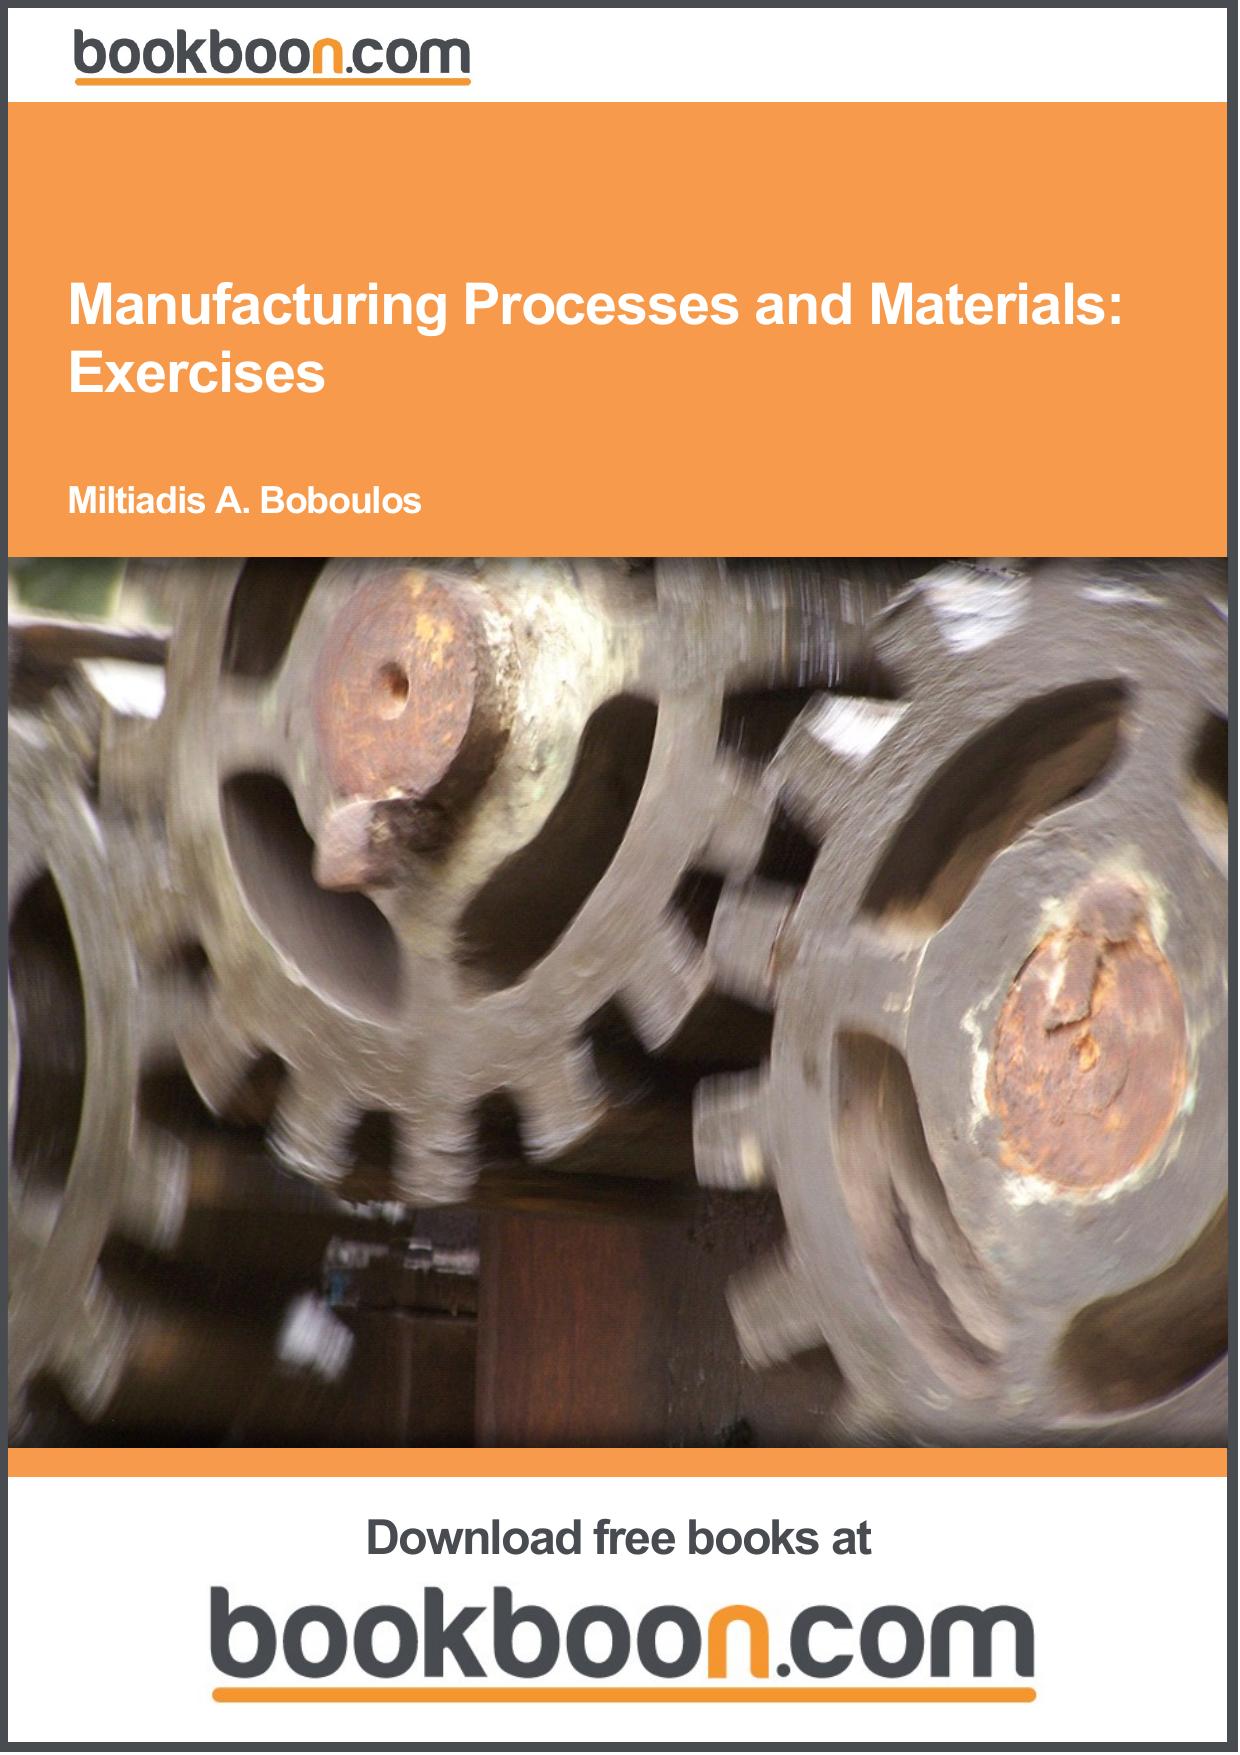 Manufacturing Processes and Materials: Exercises